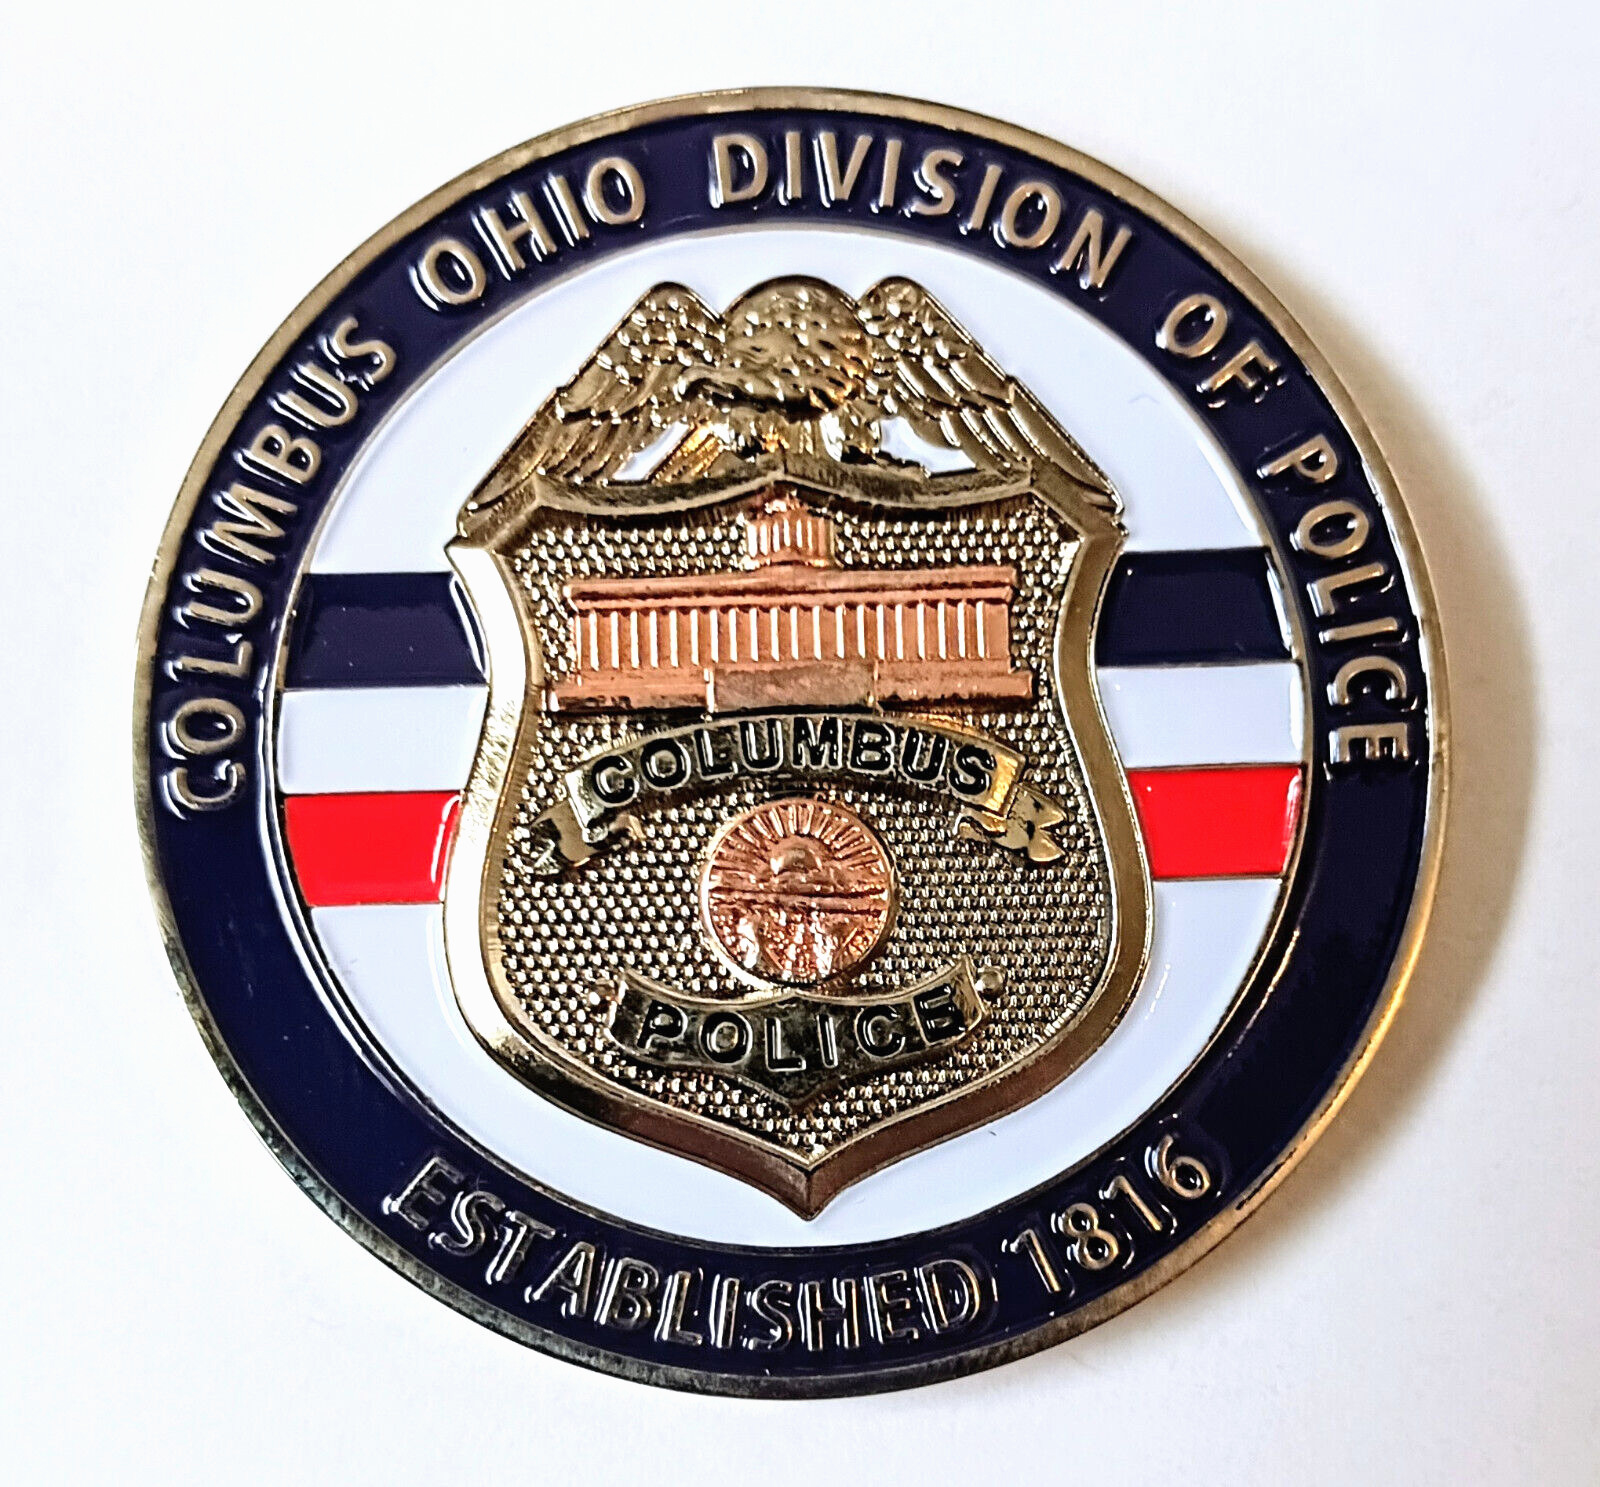 Columbus Ohio Police Mounted Unit Challenge Coin - FREE Tracked US Shipping